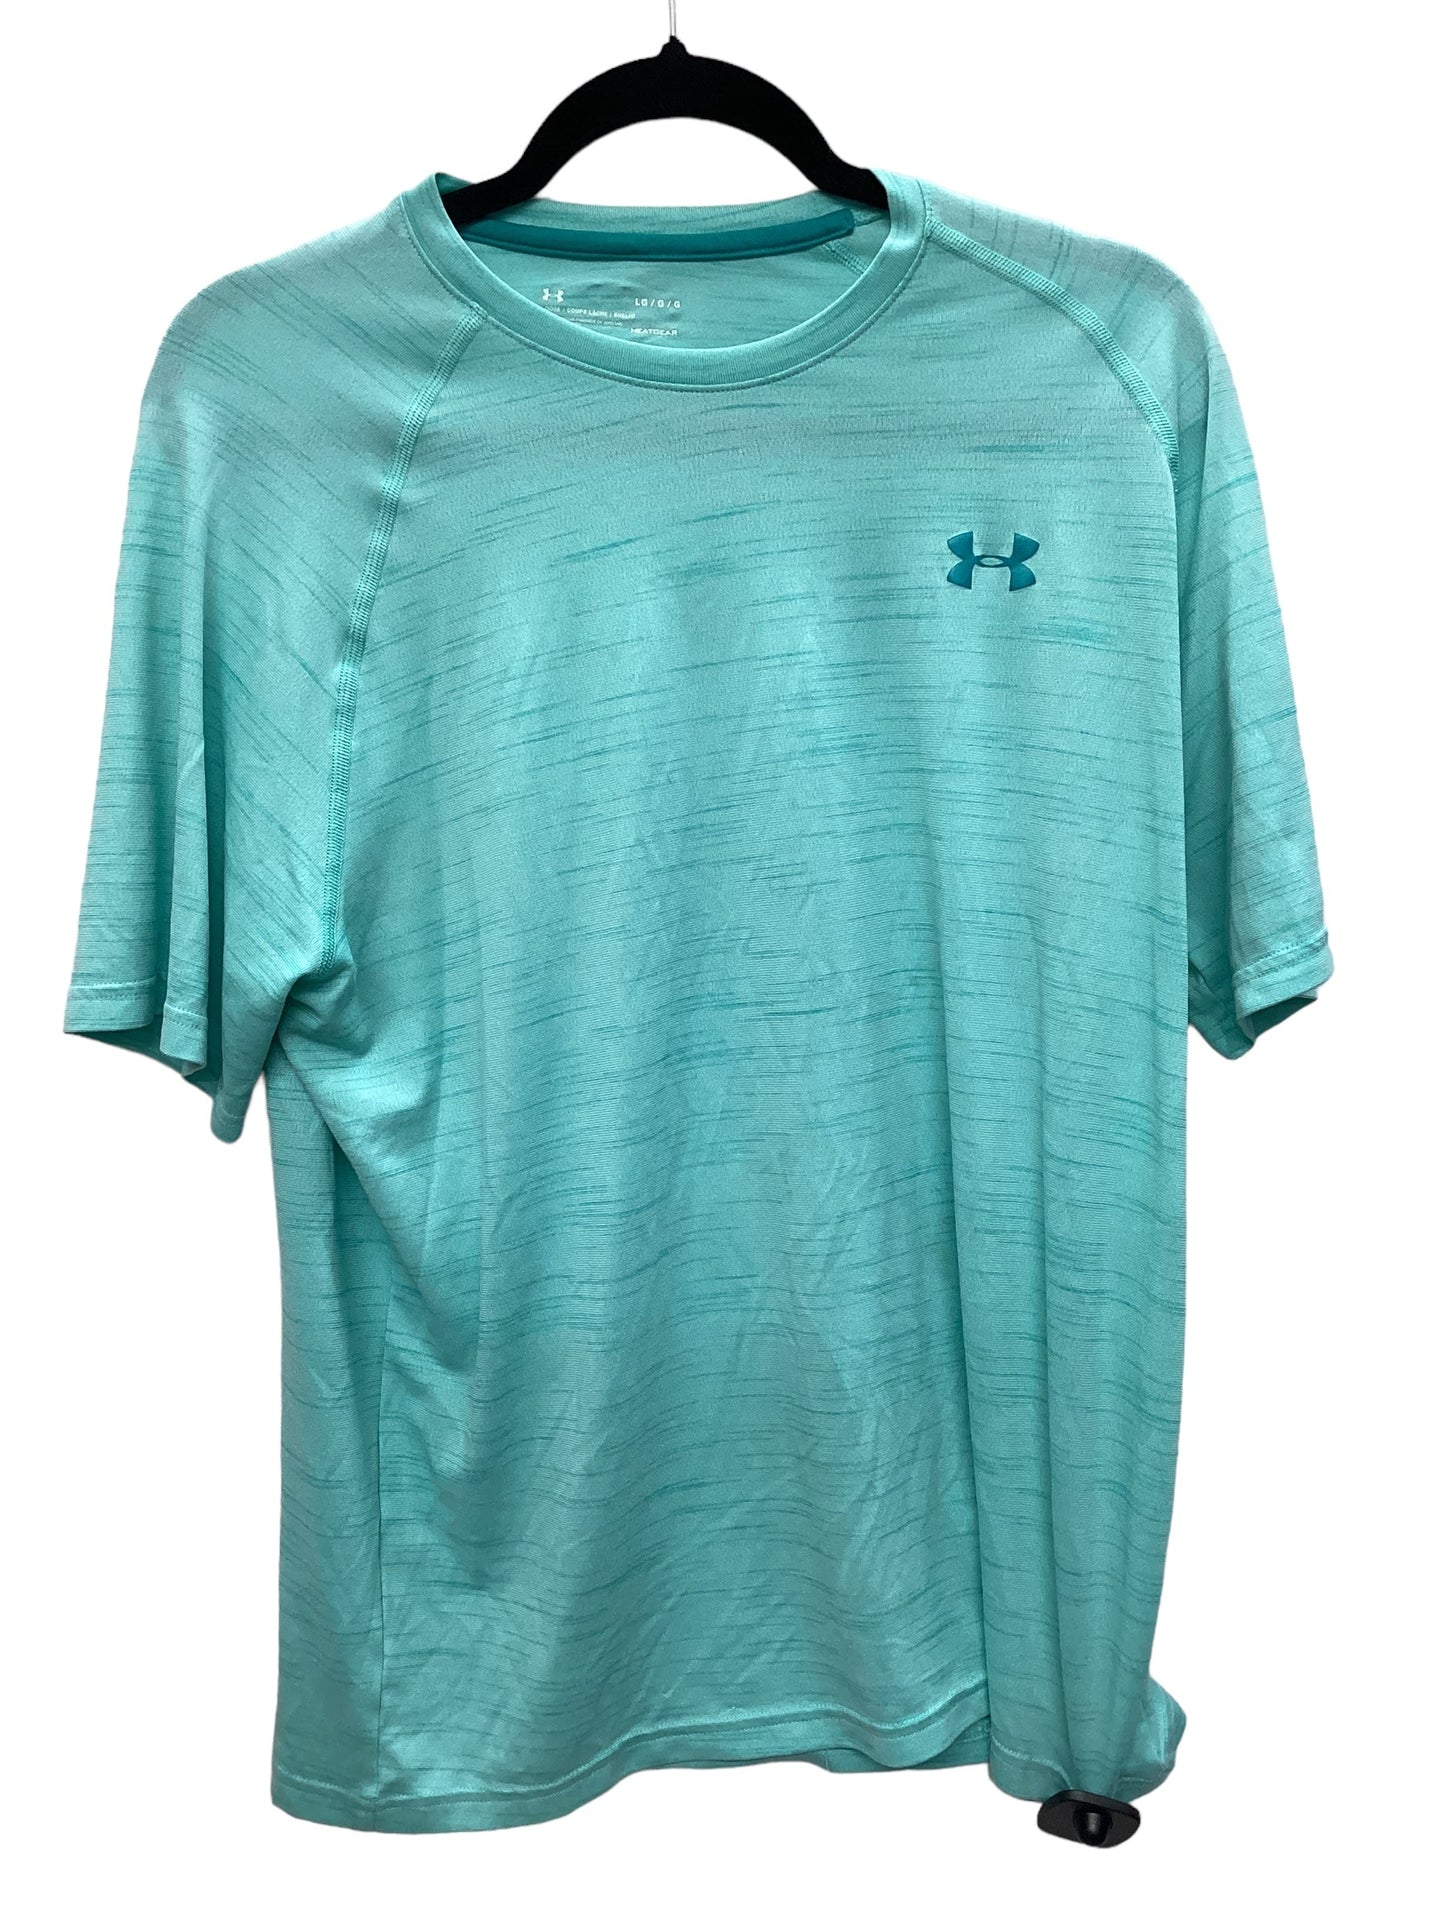 Teal Athletic Top Short Sleeve Under Armour, Size L